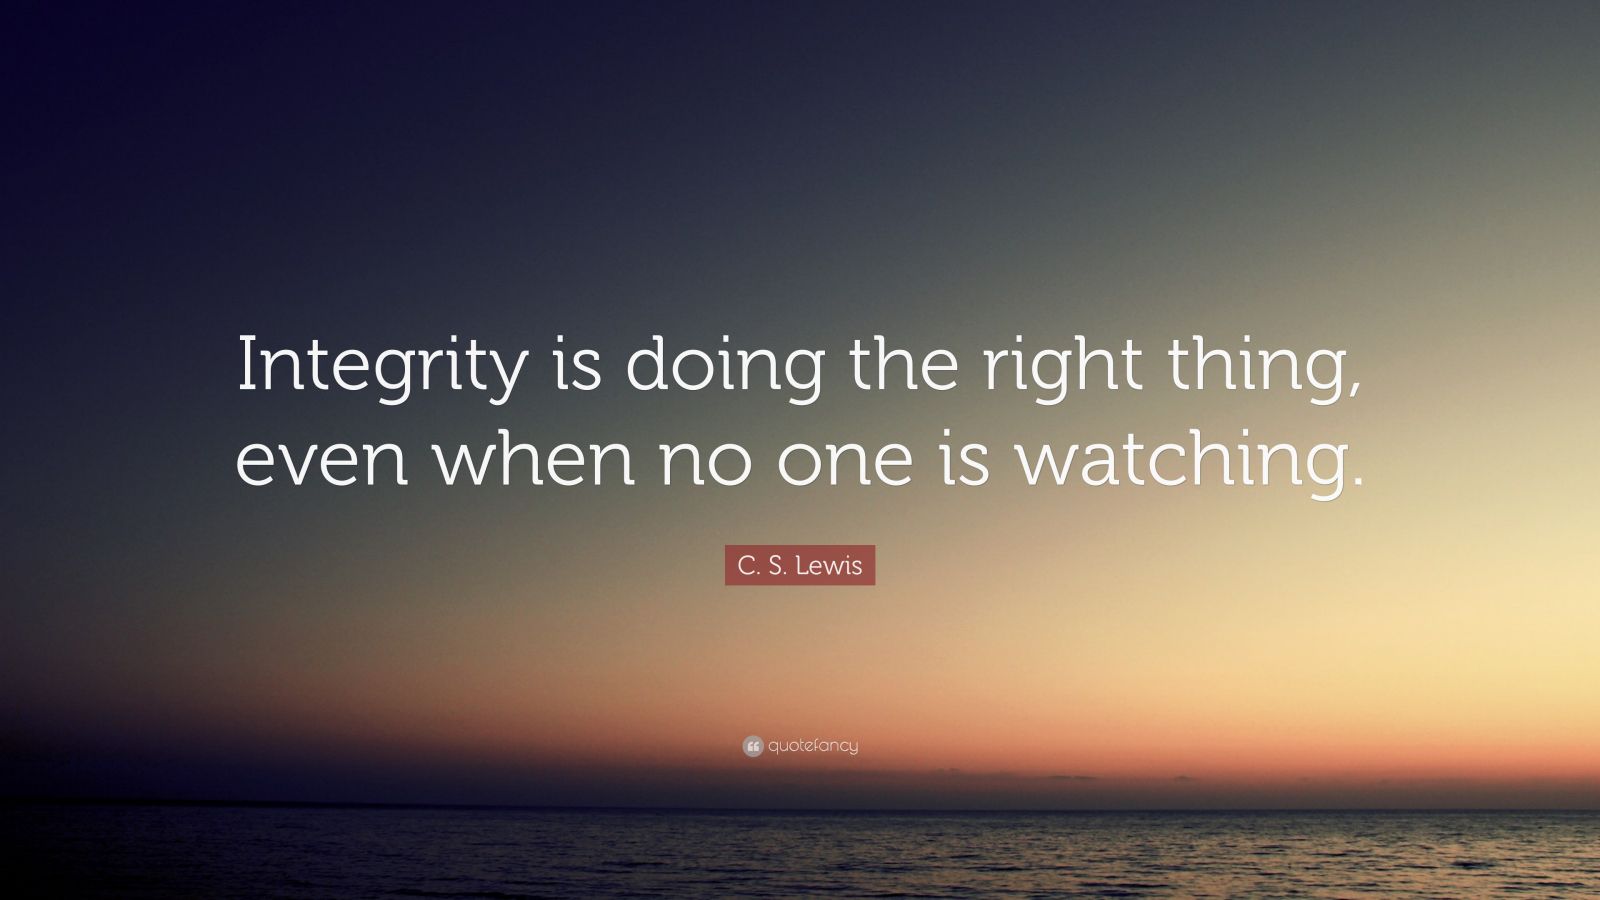 C. S. Lewis Quote: “Integrity is doing the right thing, even when no